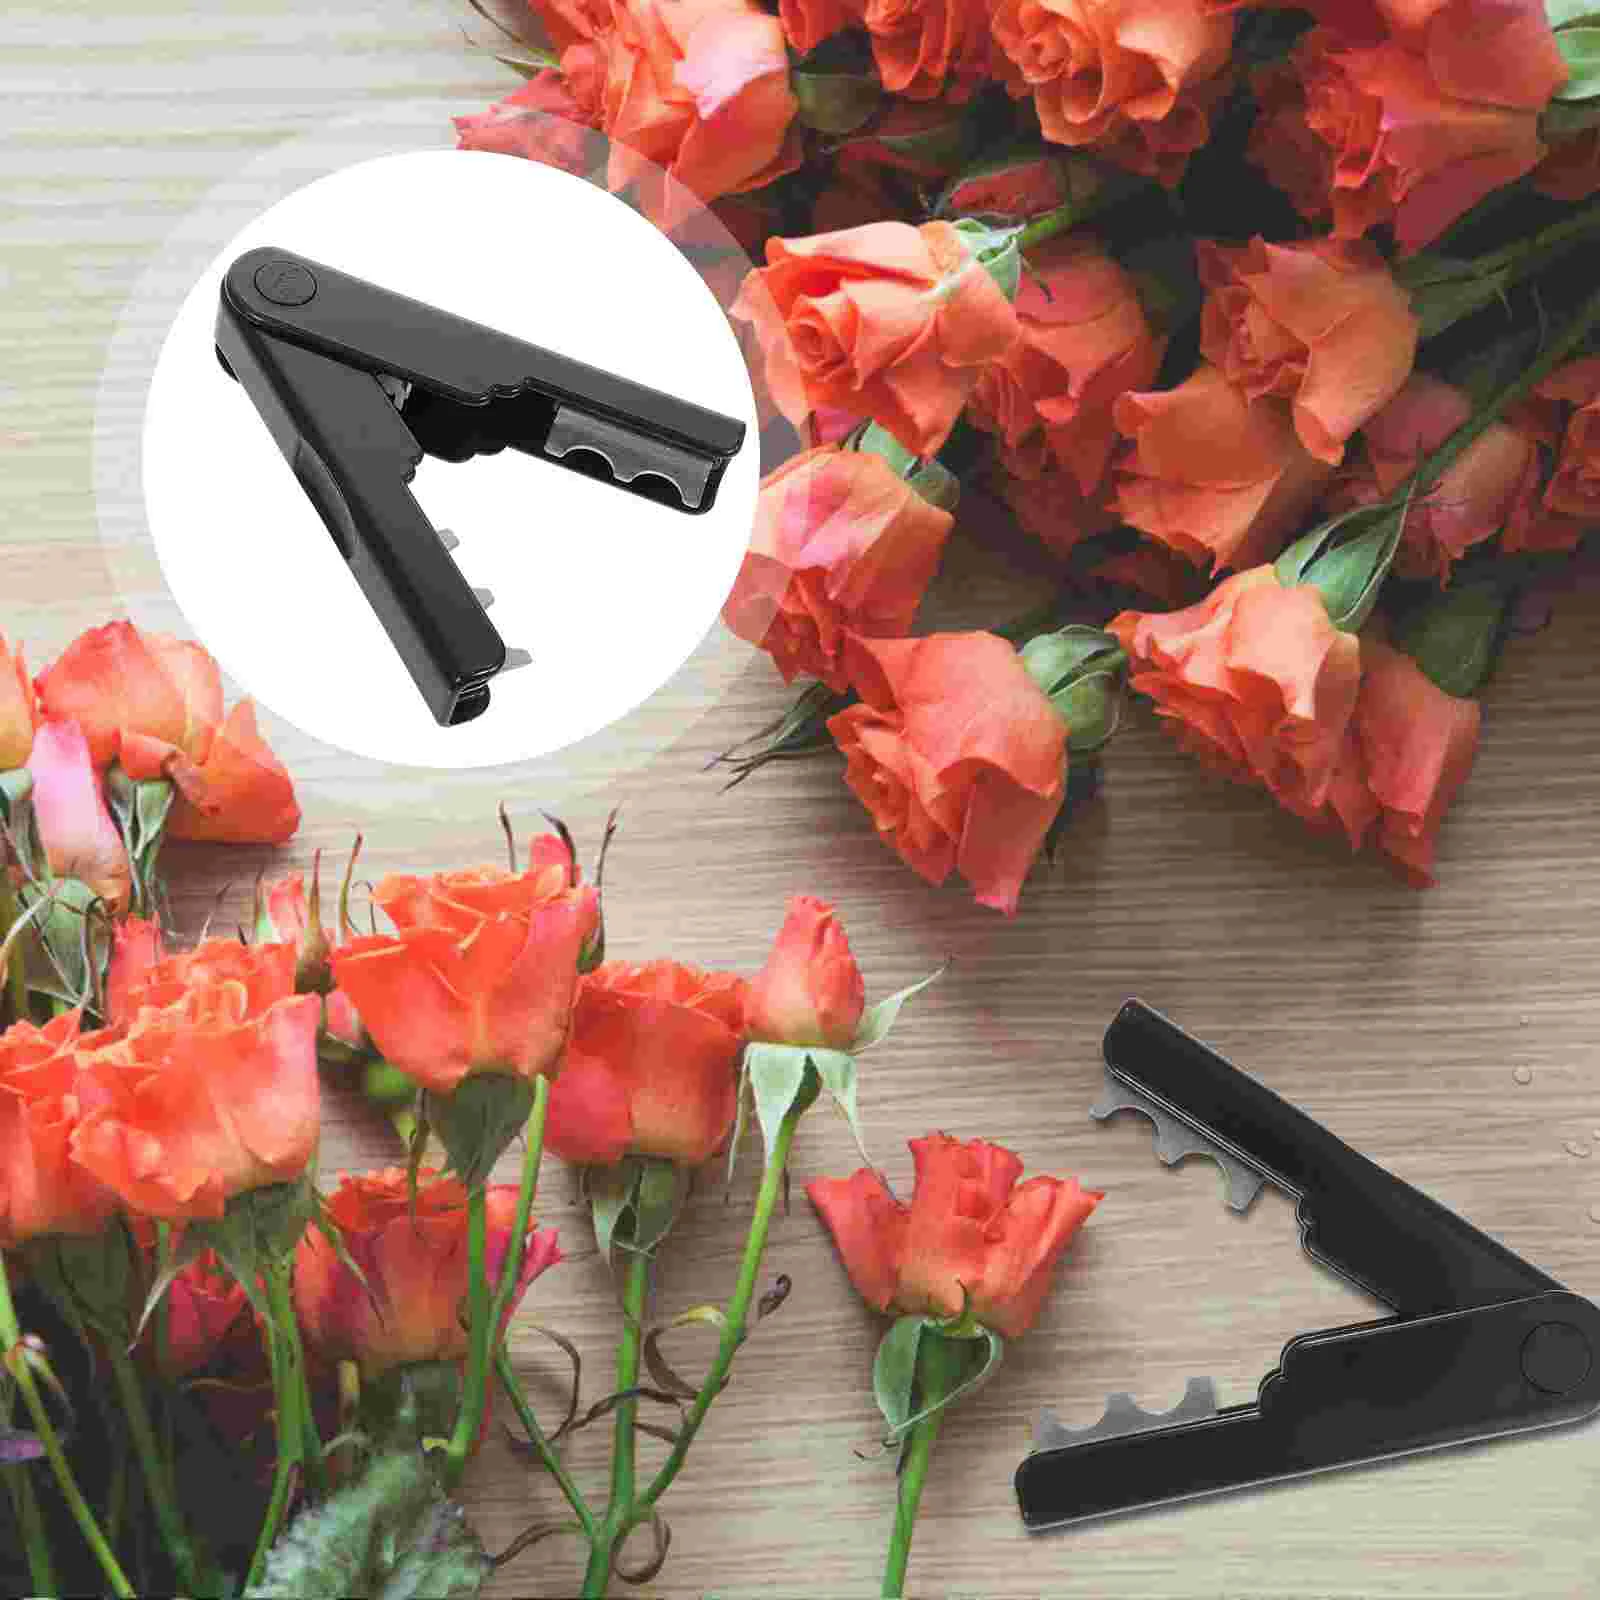 

Rose Stripper Thorn Remover Rose Cleaner Tool Leafs Thorns Stripper Tool for Florist Gardening